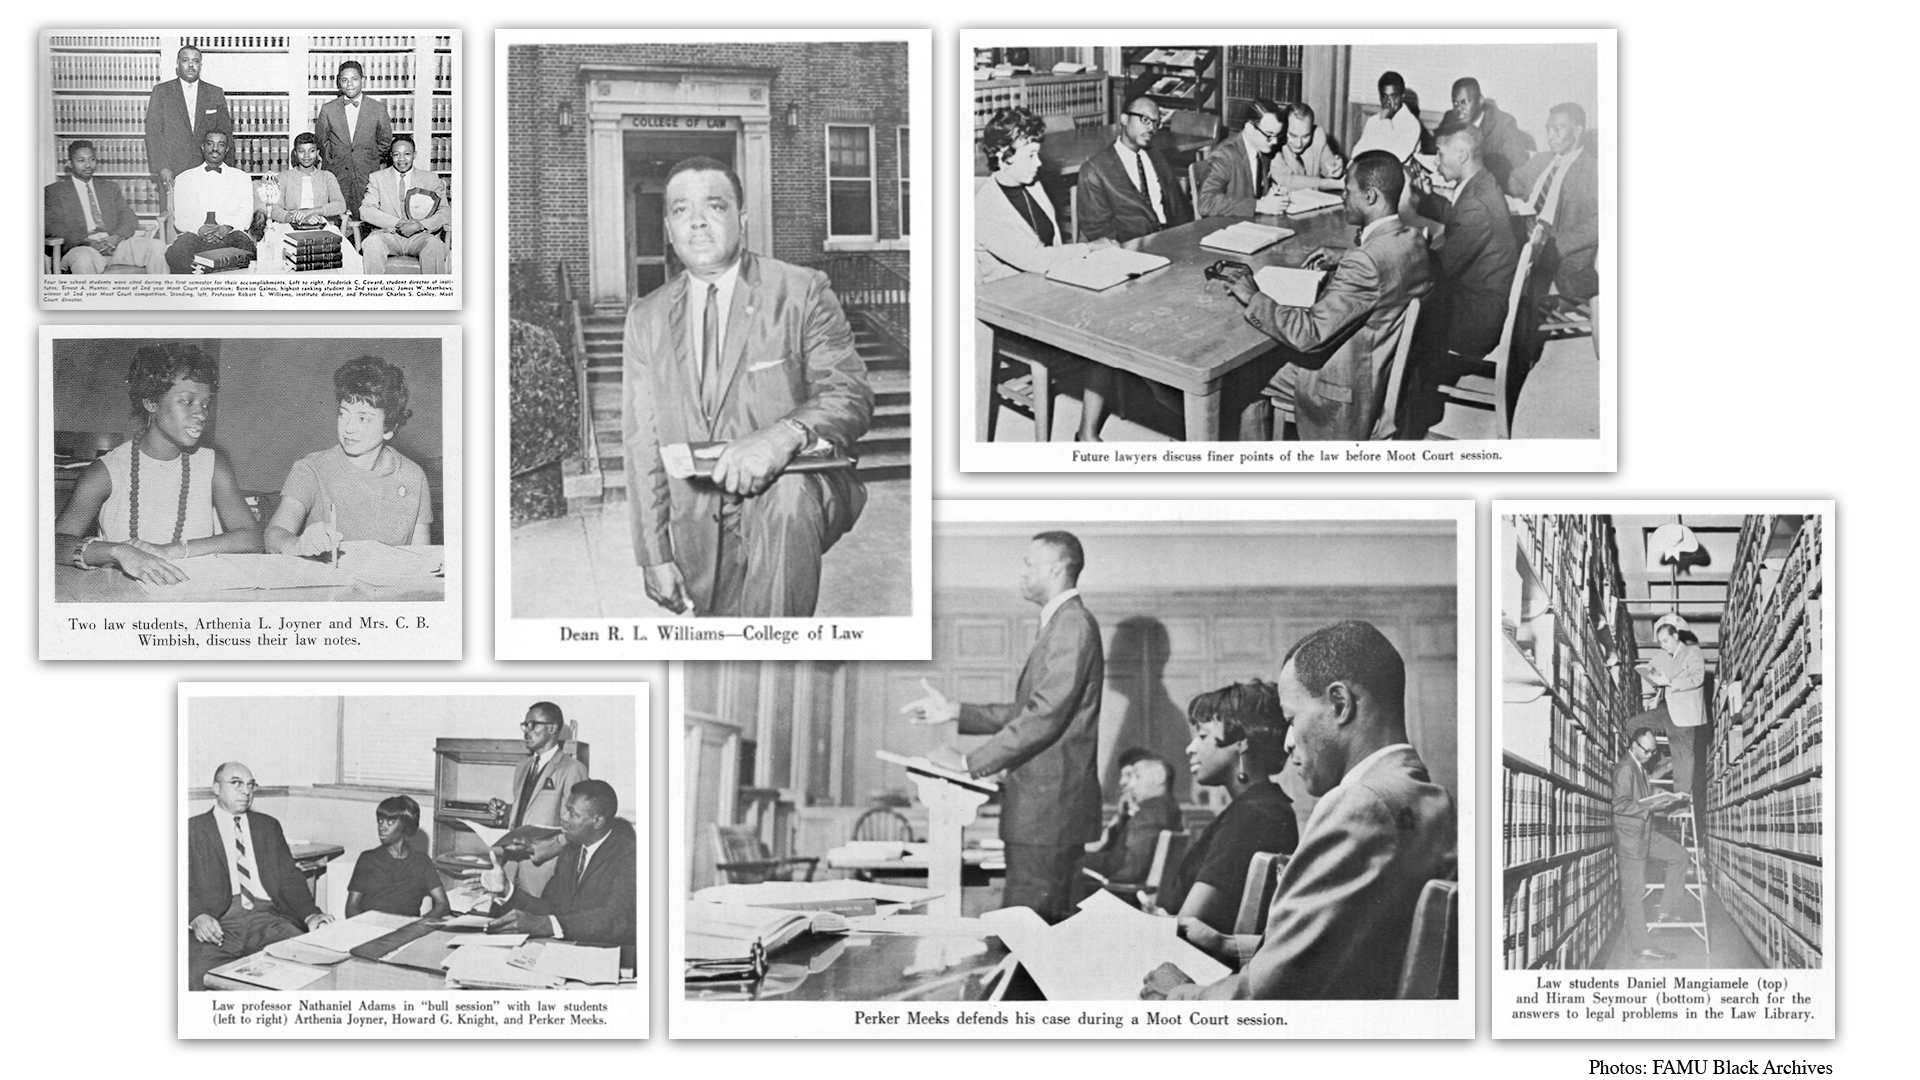 FAMU Law School Class of 1967 Image Collage